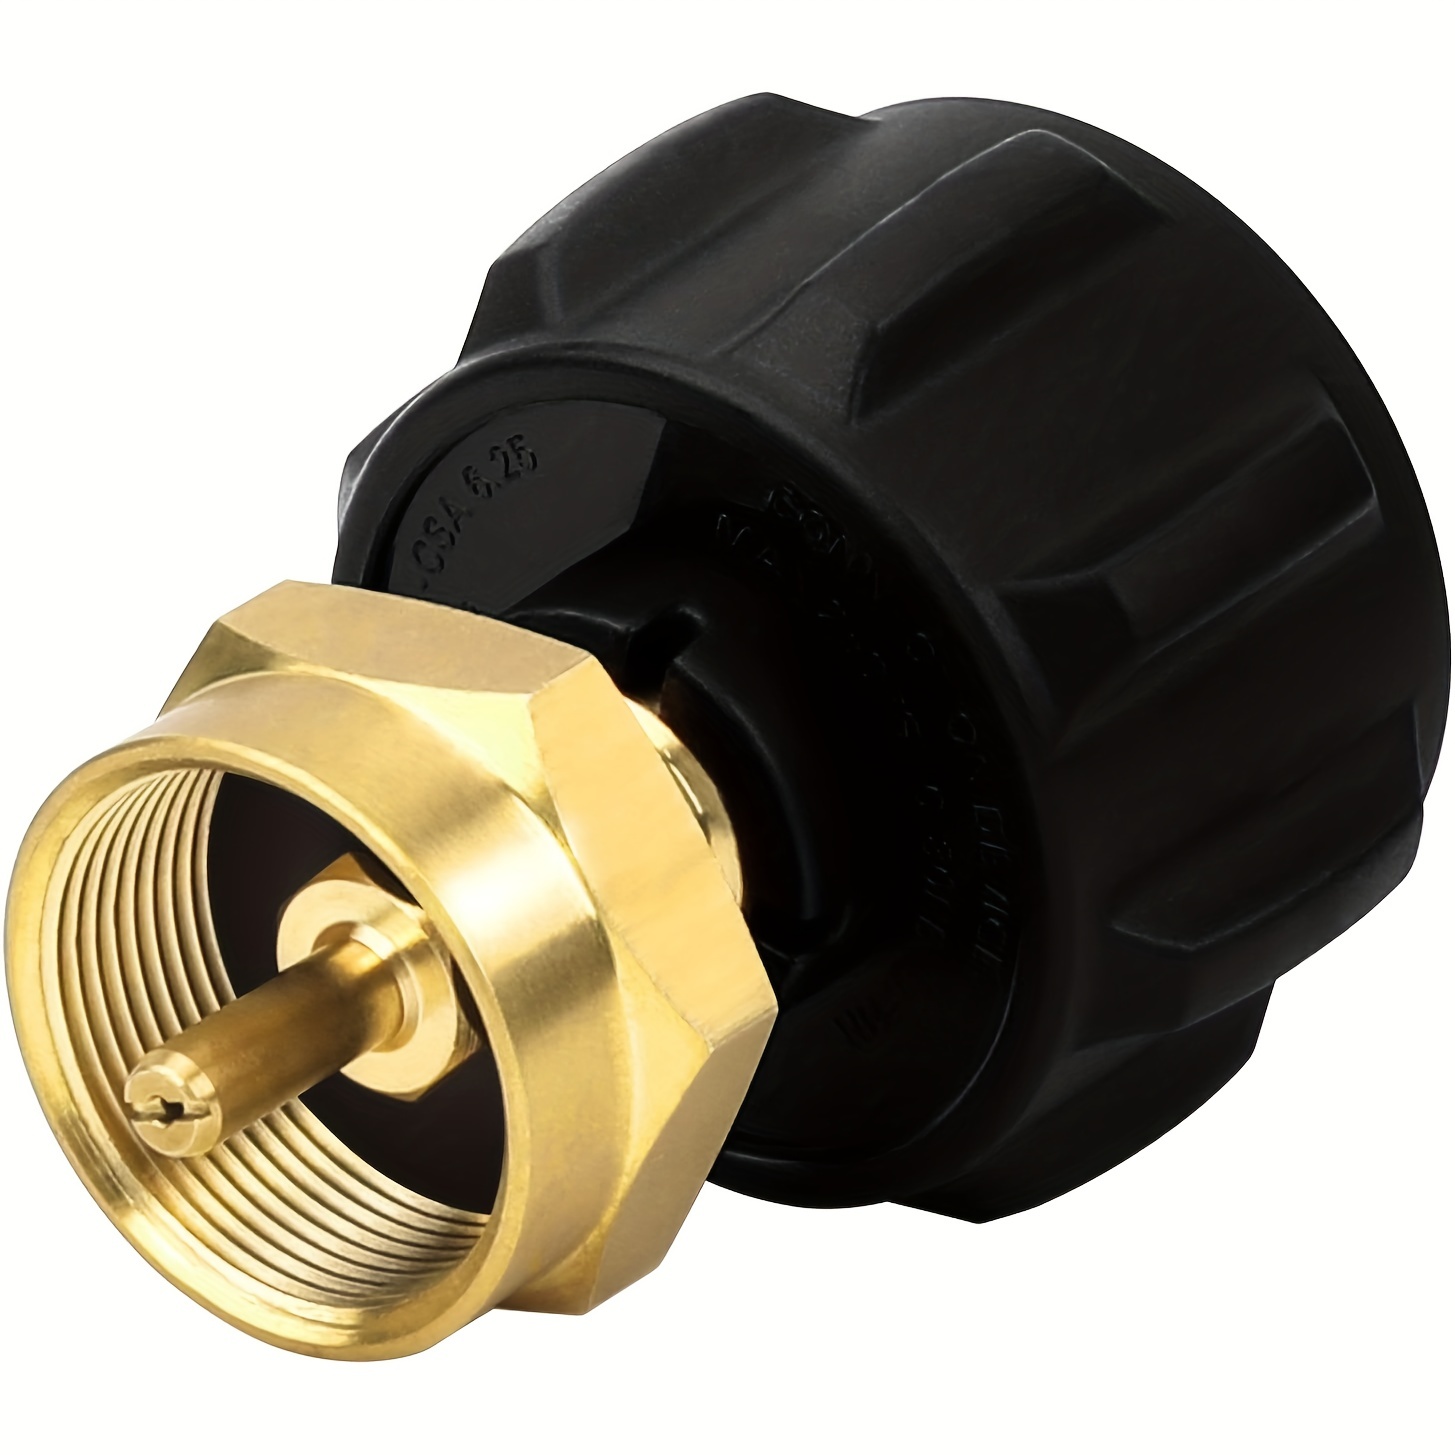 Propane Refill Adapter for 20 LB to 1 LB Tanks | Solid Brass | Free Shipping | Our Store